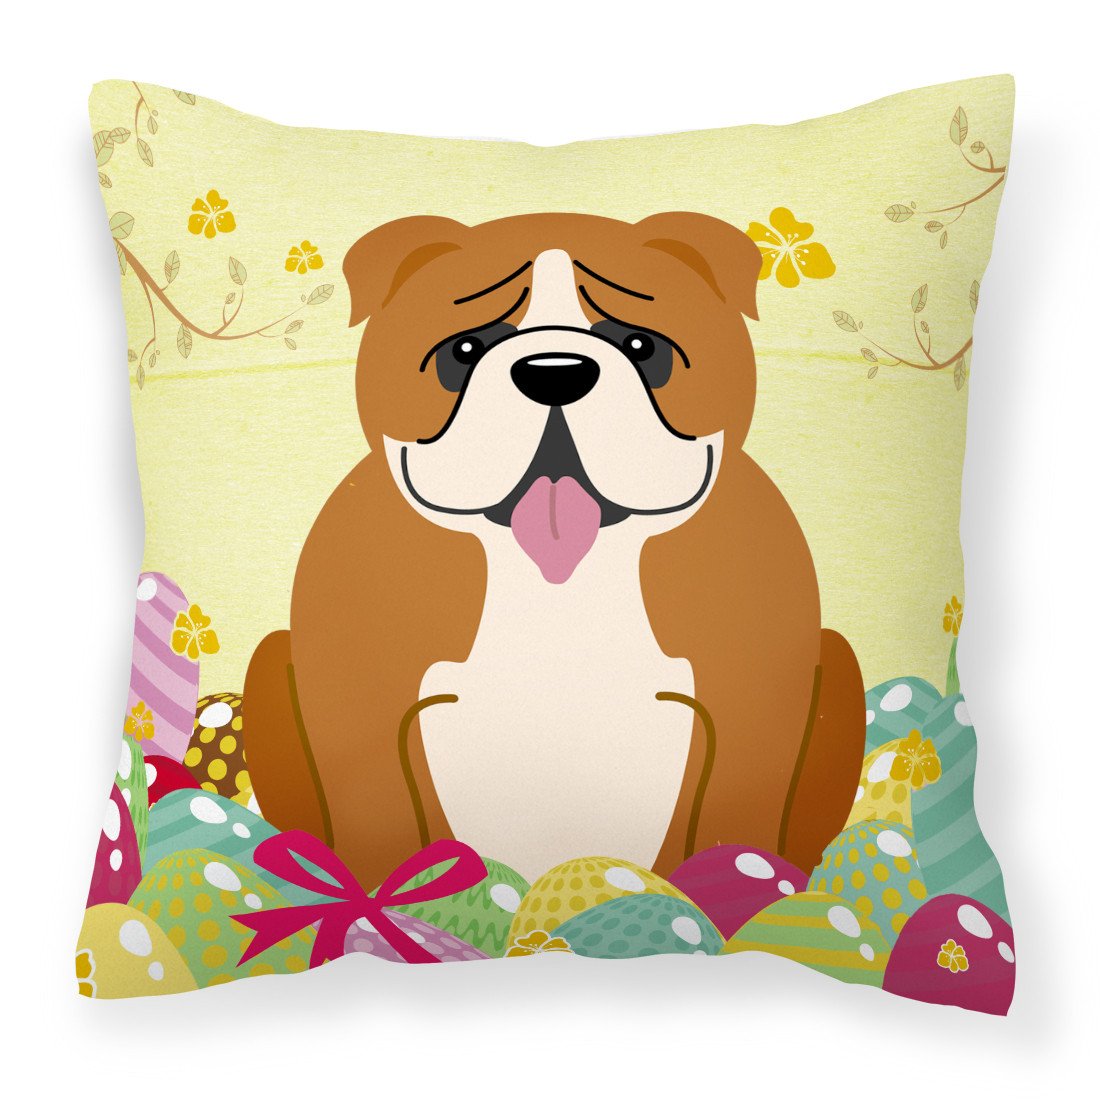 Easter Eggs English Bulldog Red White Fabric Decorative Pillow BB6120PW1818 by Caroline's Treasures